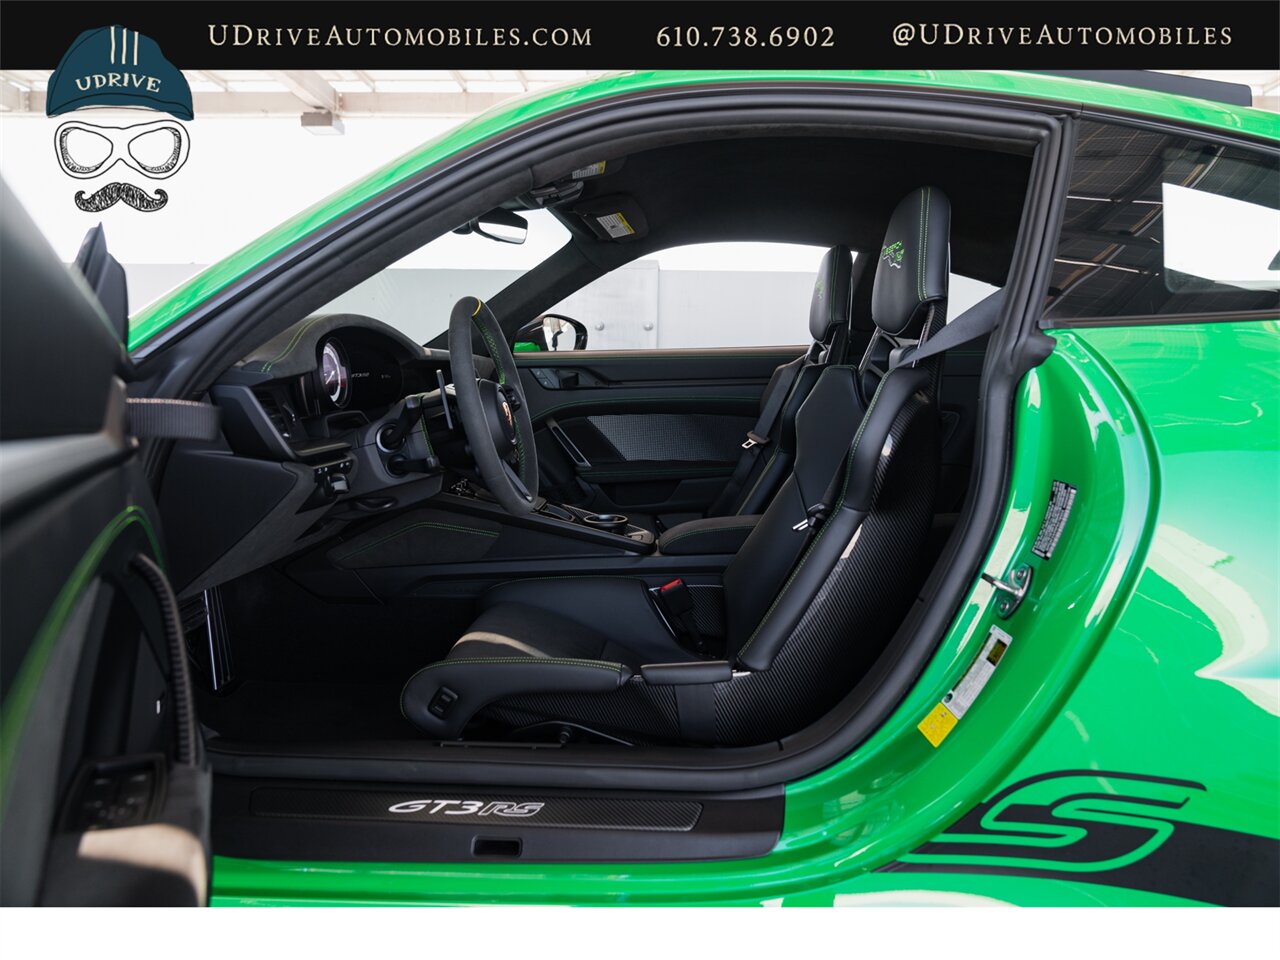 2023 Porsche 911 GT3 RS  Weissach Pkg FAL Full Body PPF $43k in Extras - Photo 45 - West Chester, PA 19382